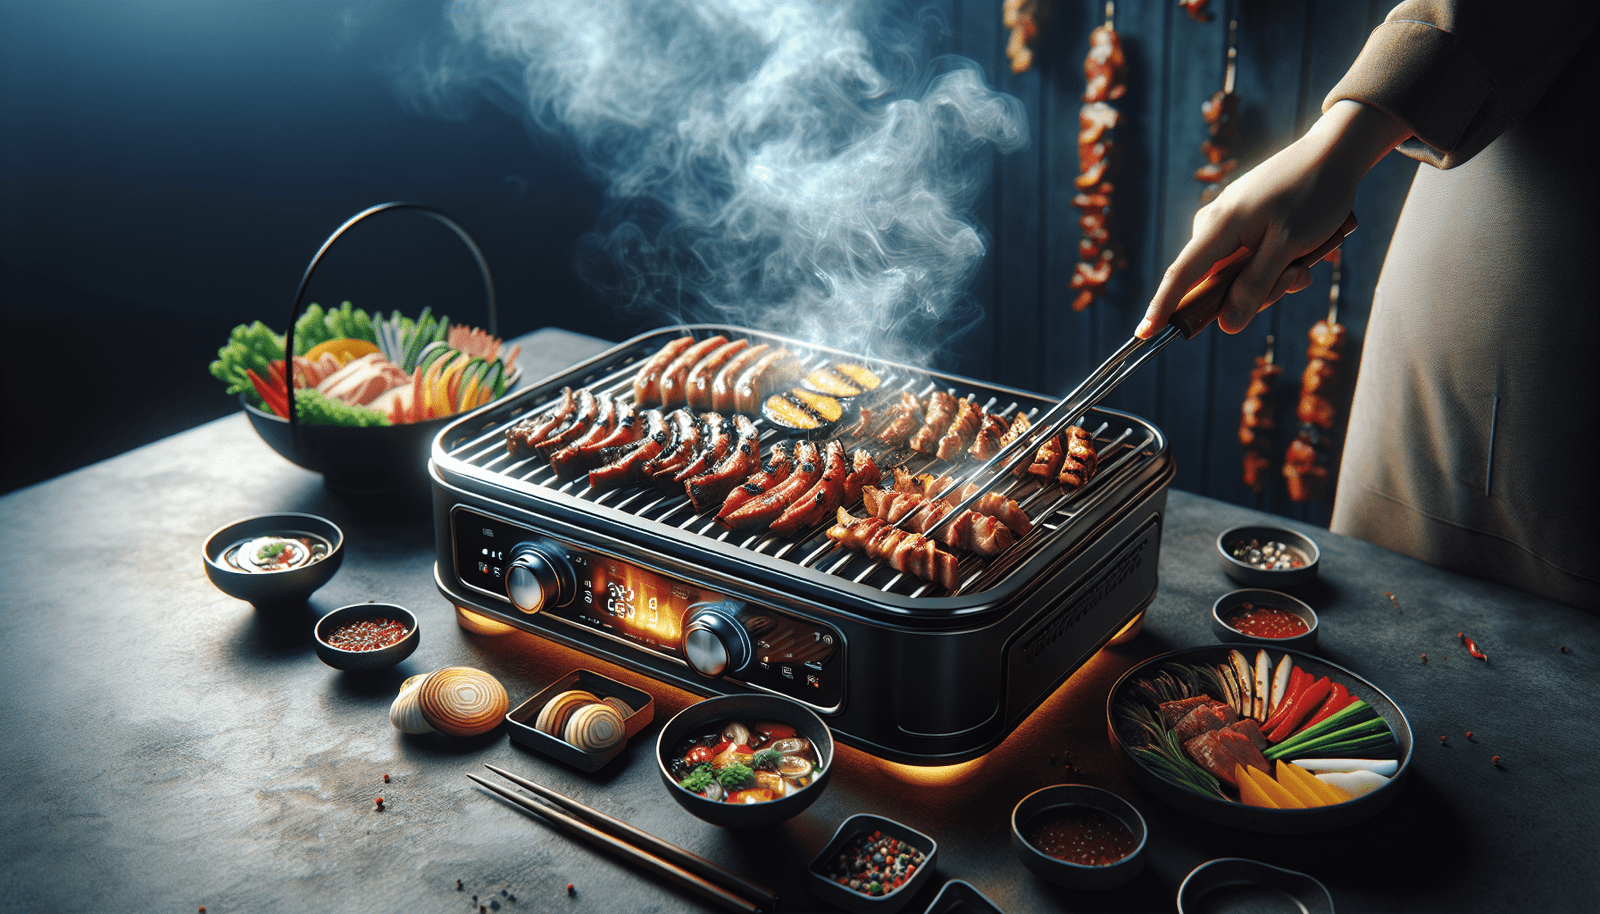 Can You Share Insights Into The Popularity Of Korean Barbecue At Home?